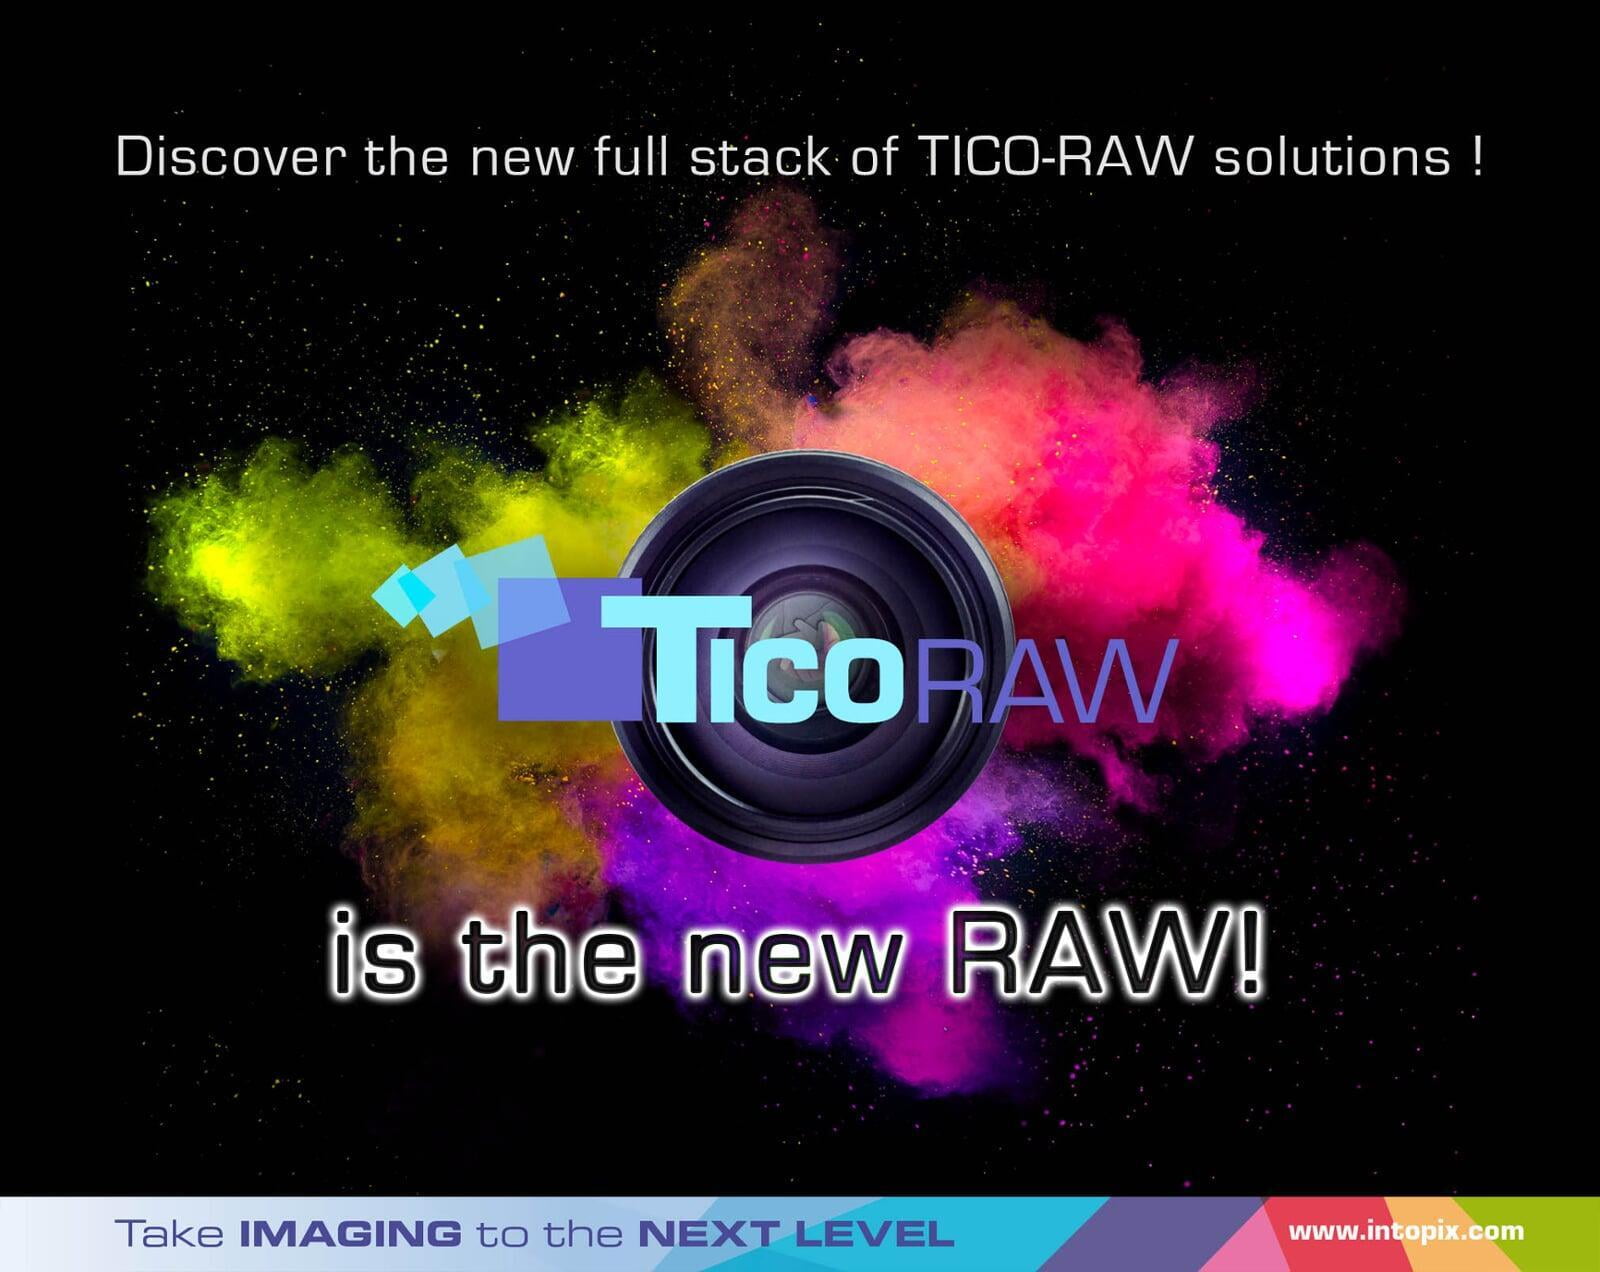 The new TicoRAW full stack to improve RAW image workflows and camera designs